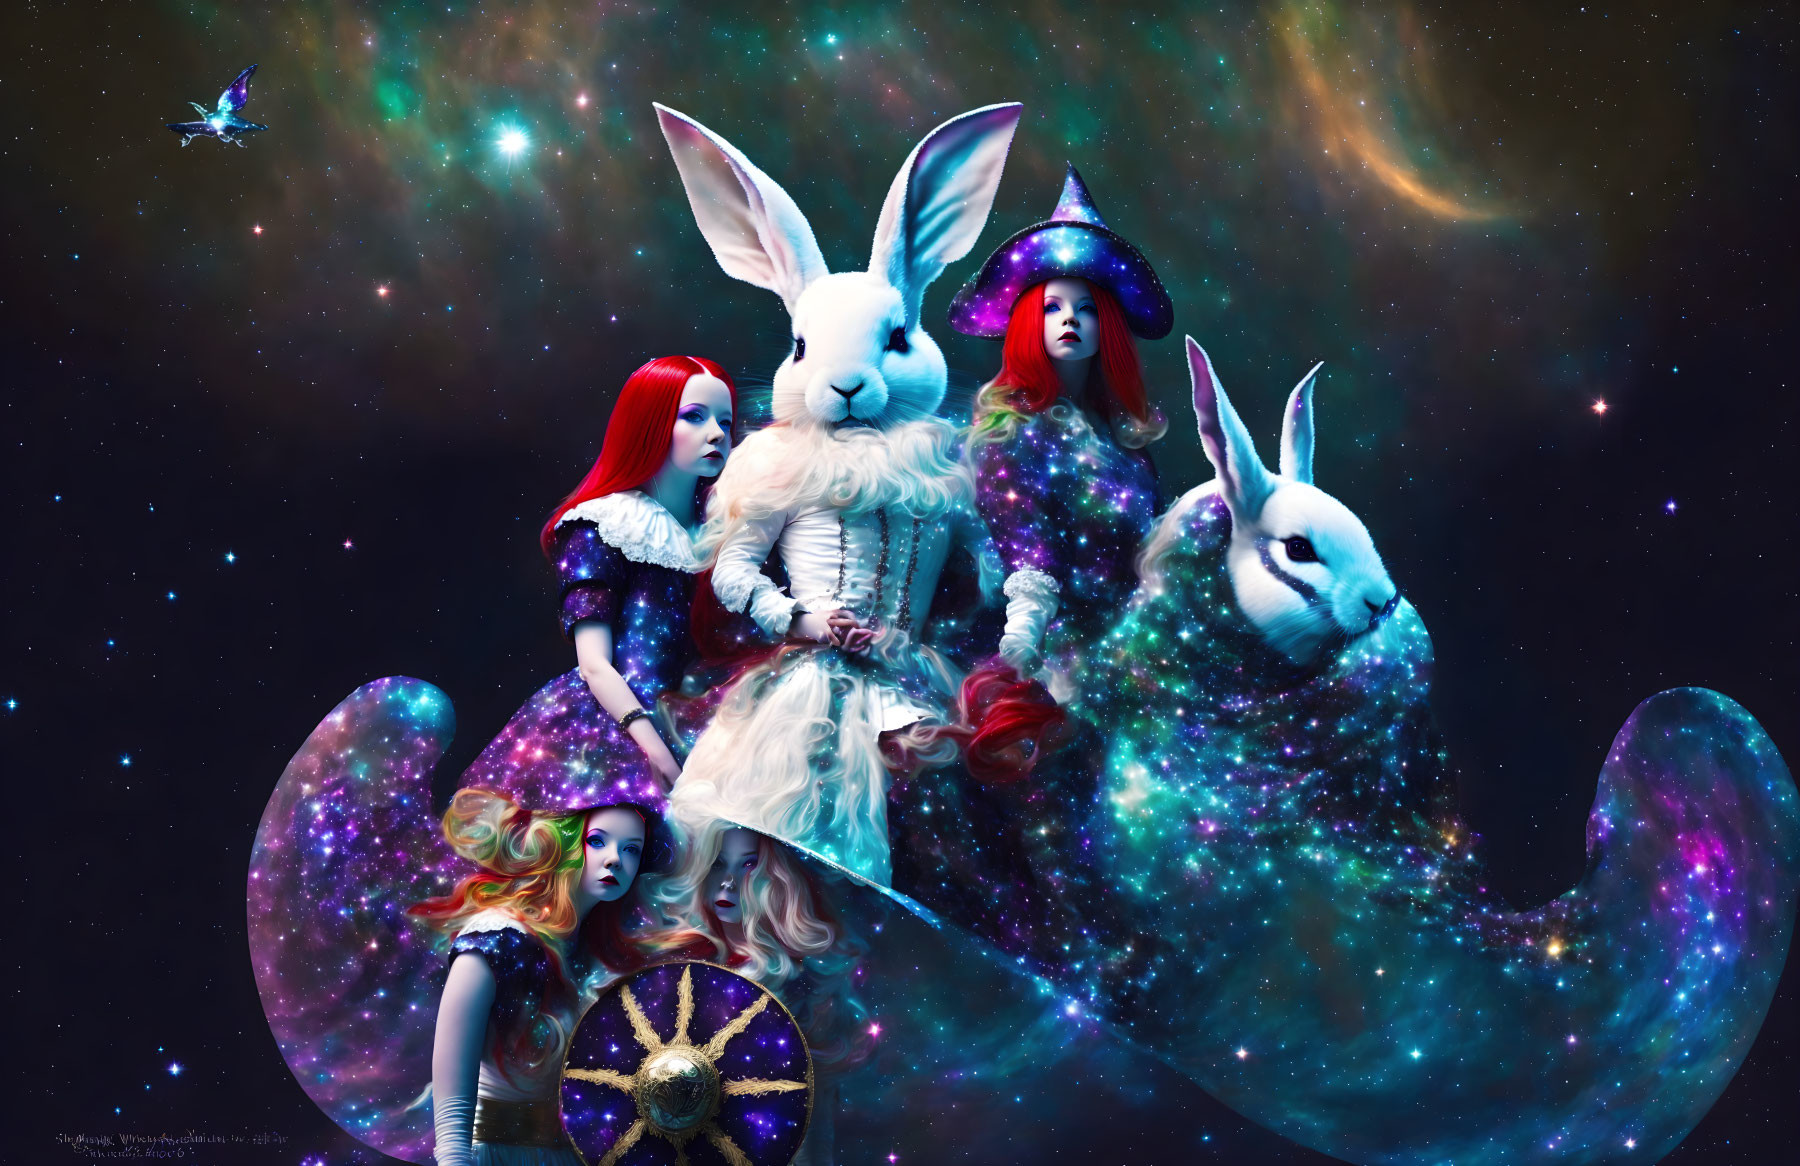 Whimsical cosmic scene with surreal characters in rabbit heads and galaxy backdrop